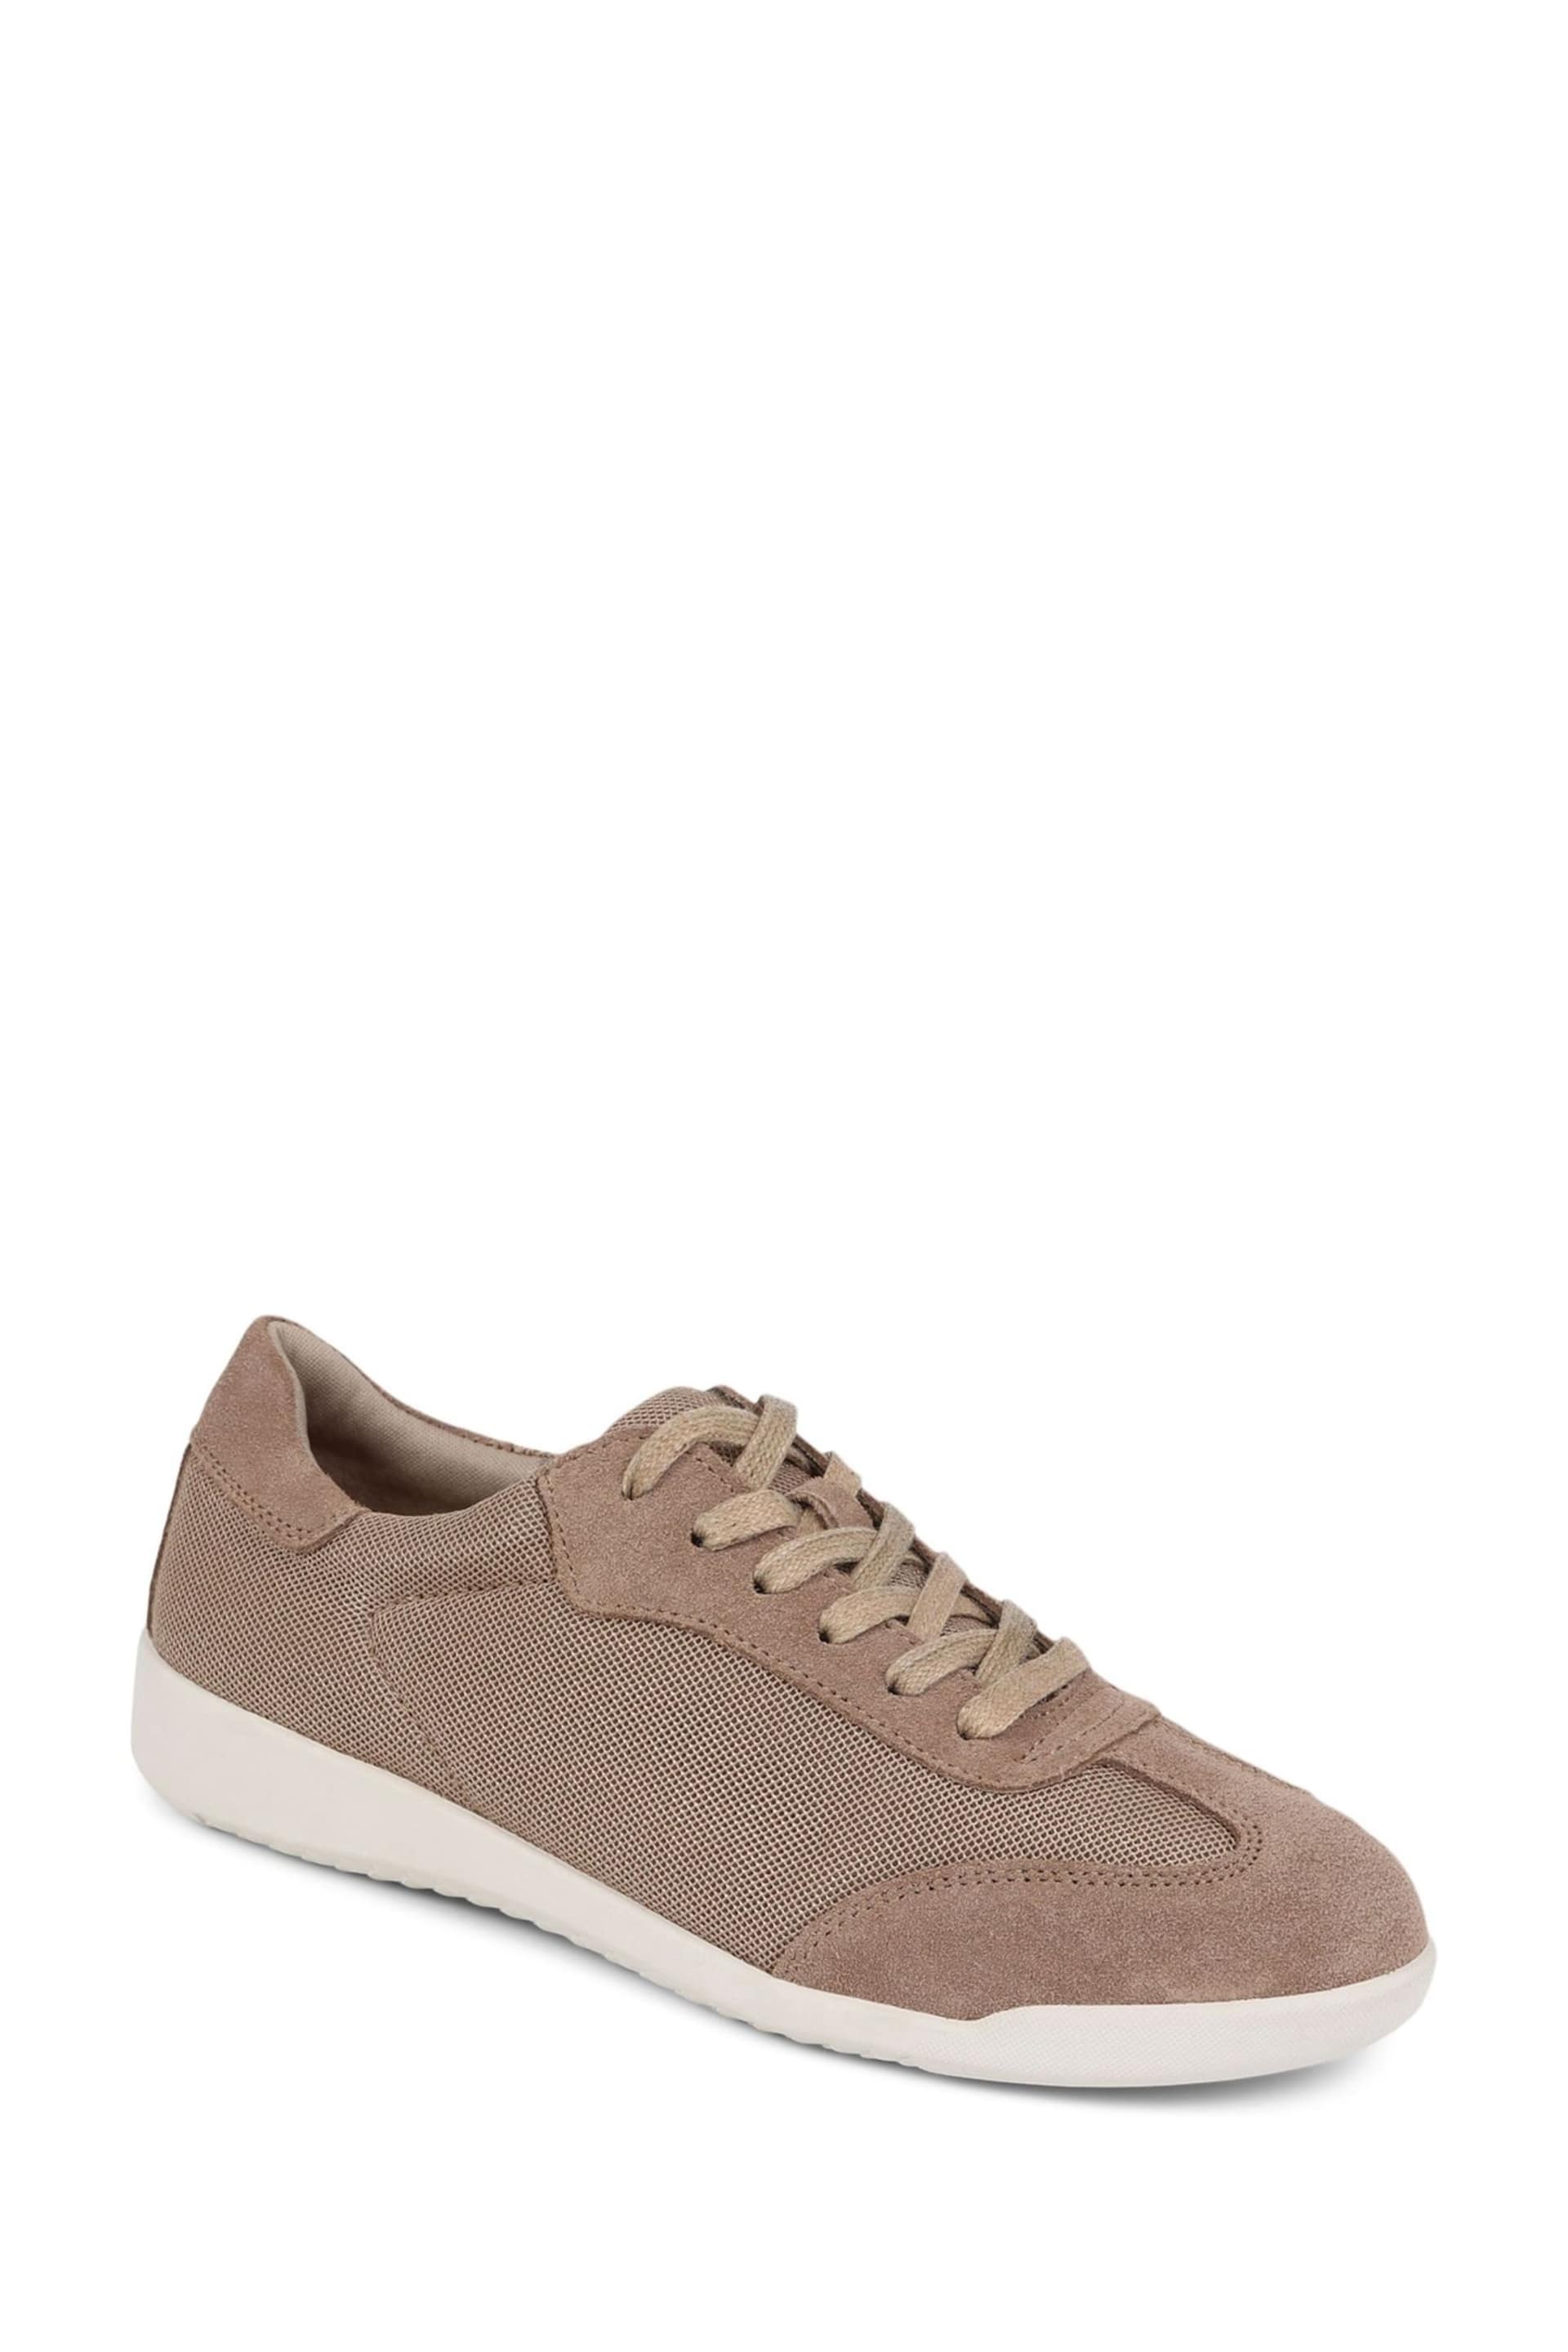 Pavers Natural Memory Foam Leather Trainers - Image 1 of 5